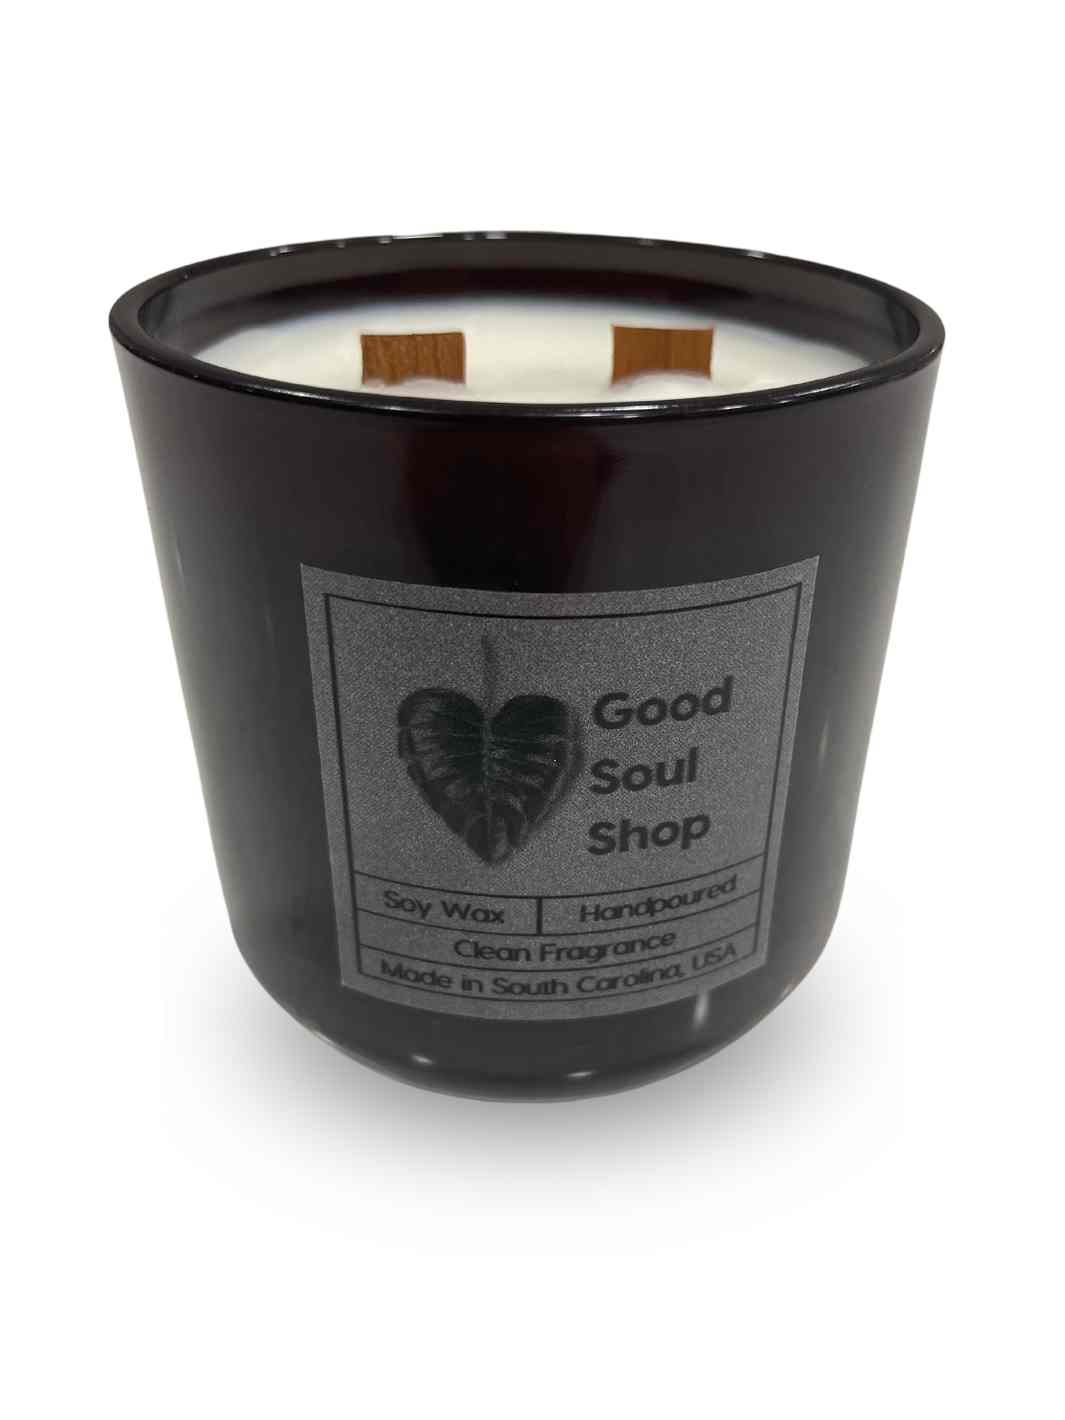 Good Soul Shop Double Wood Wick Candle Long Lasting Clean Fragrance Black Glass